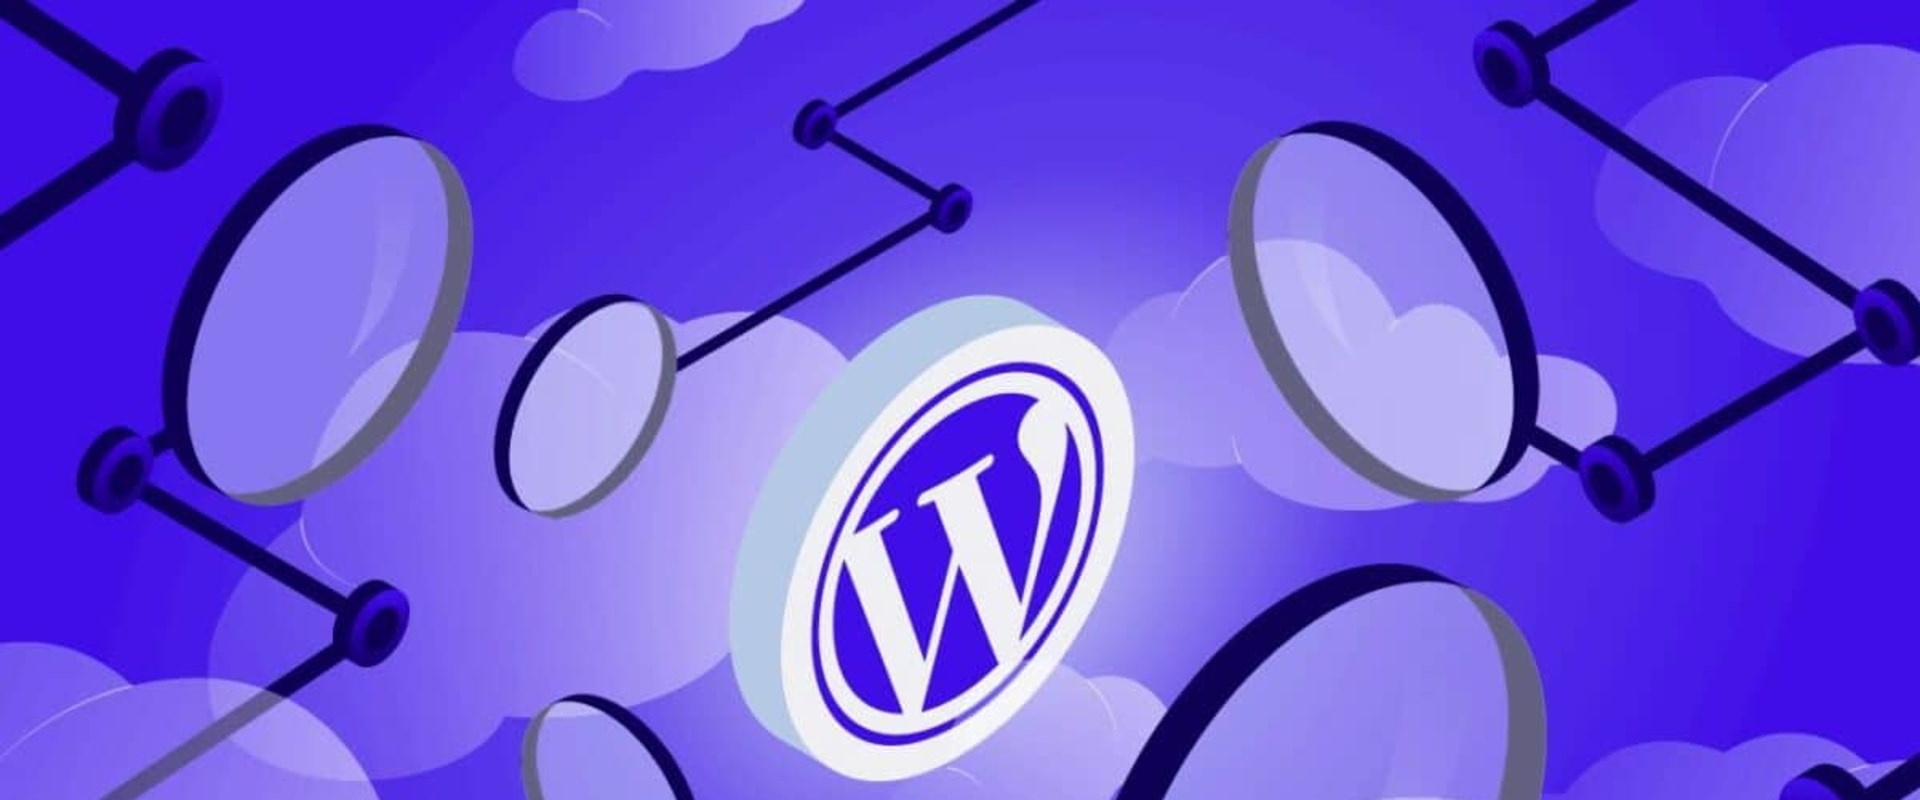 What is wordpress cms used for?